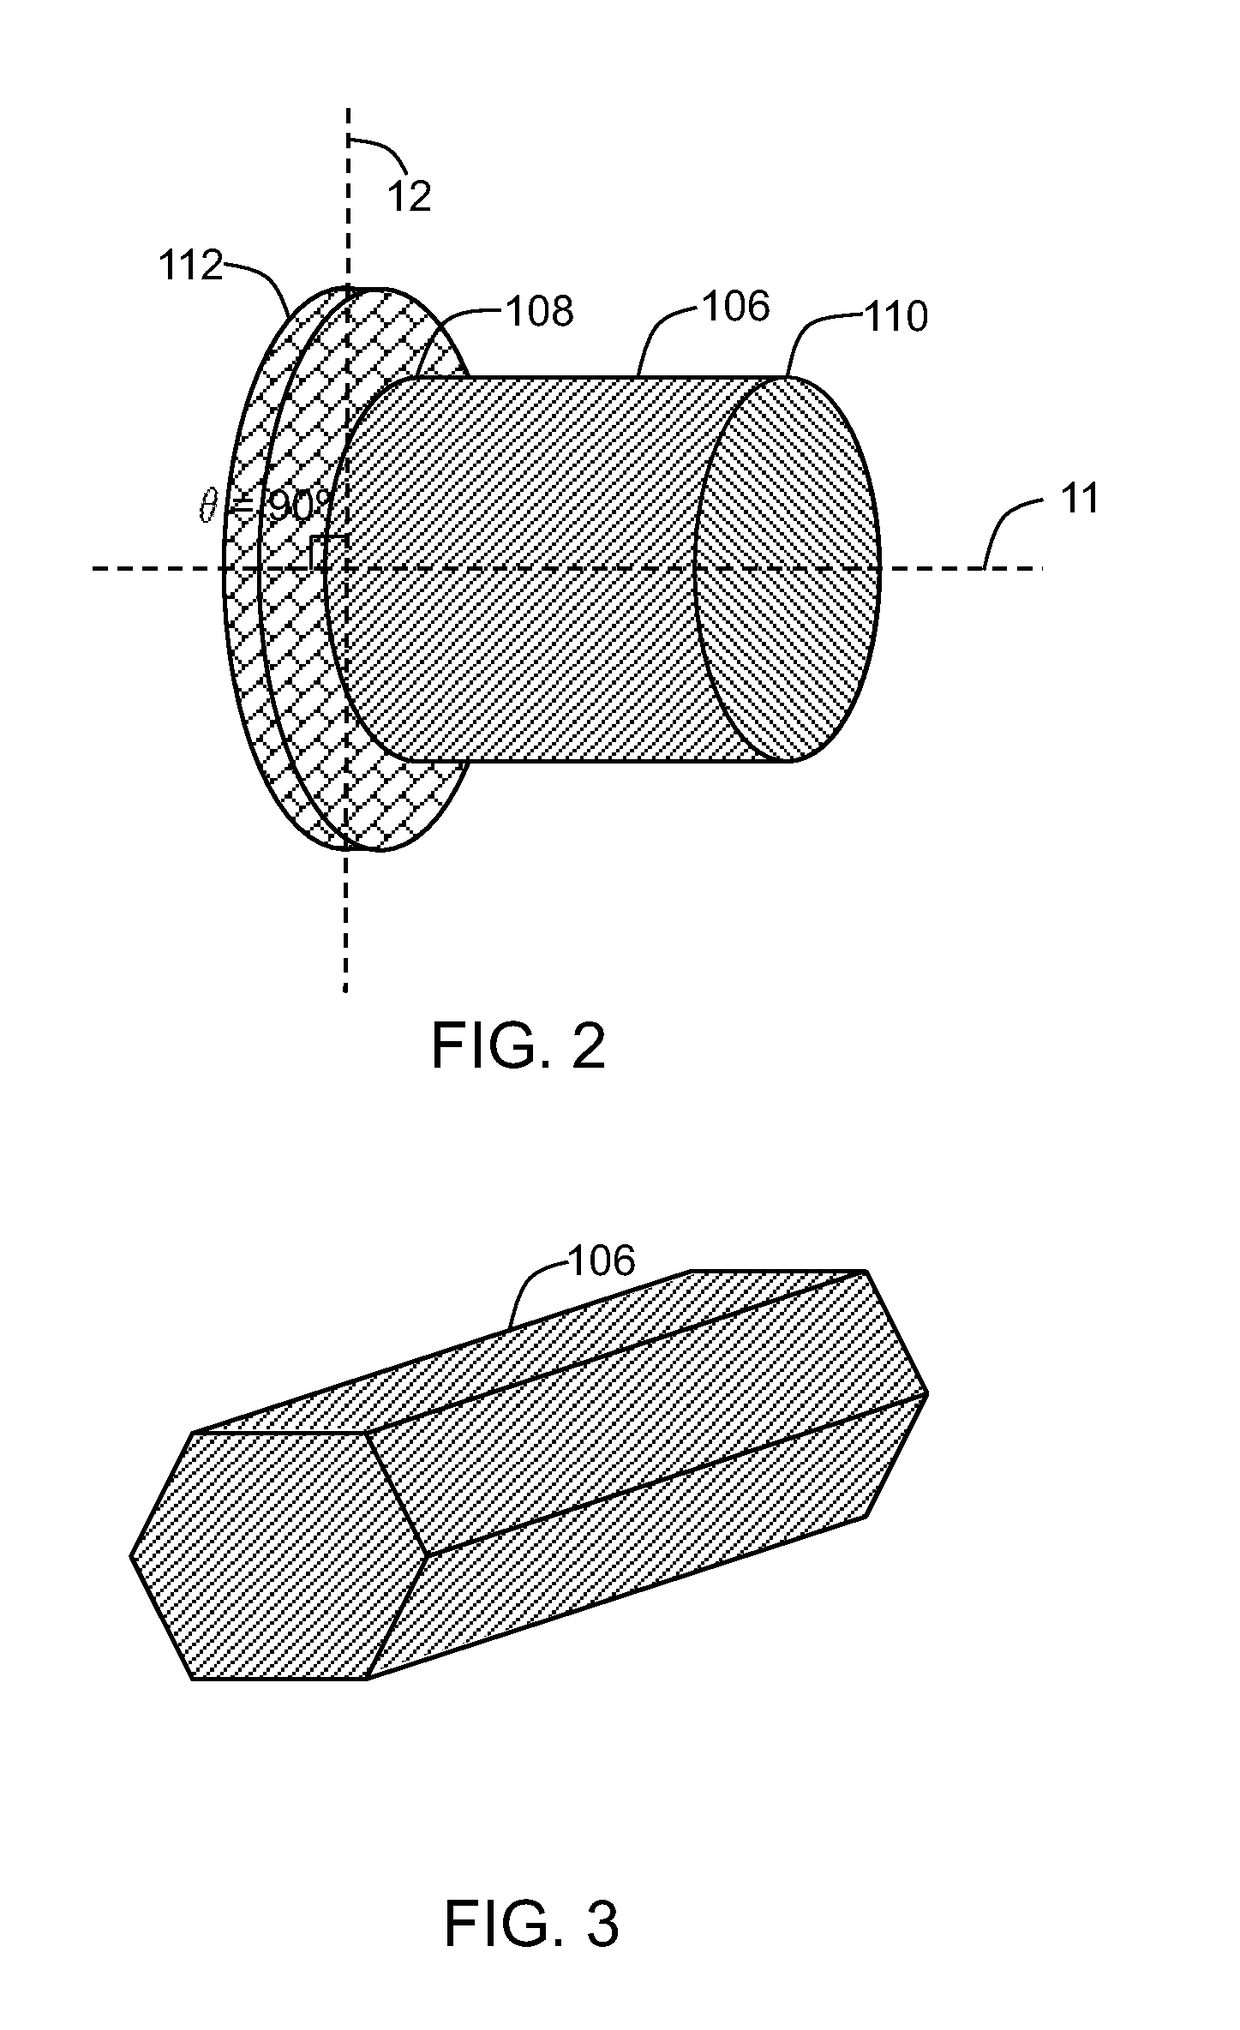 Film capacitor and the method of forming the same